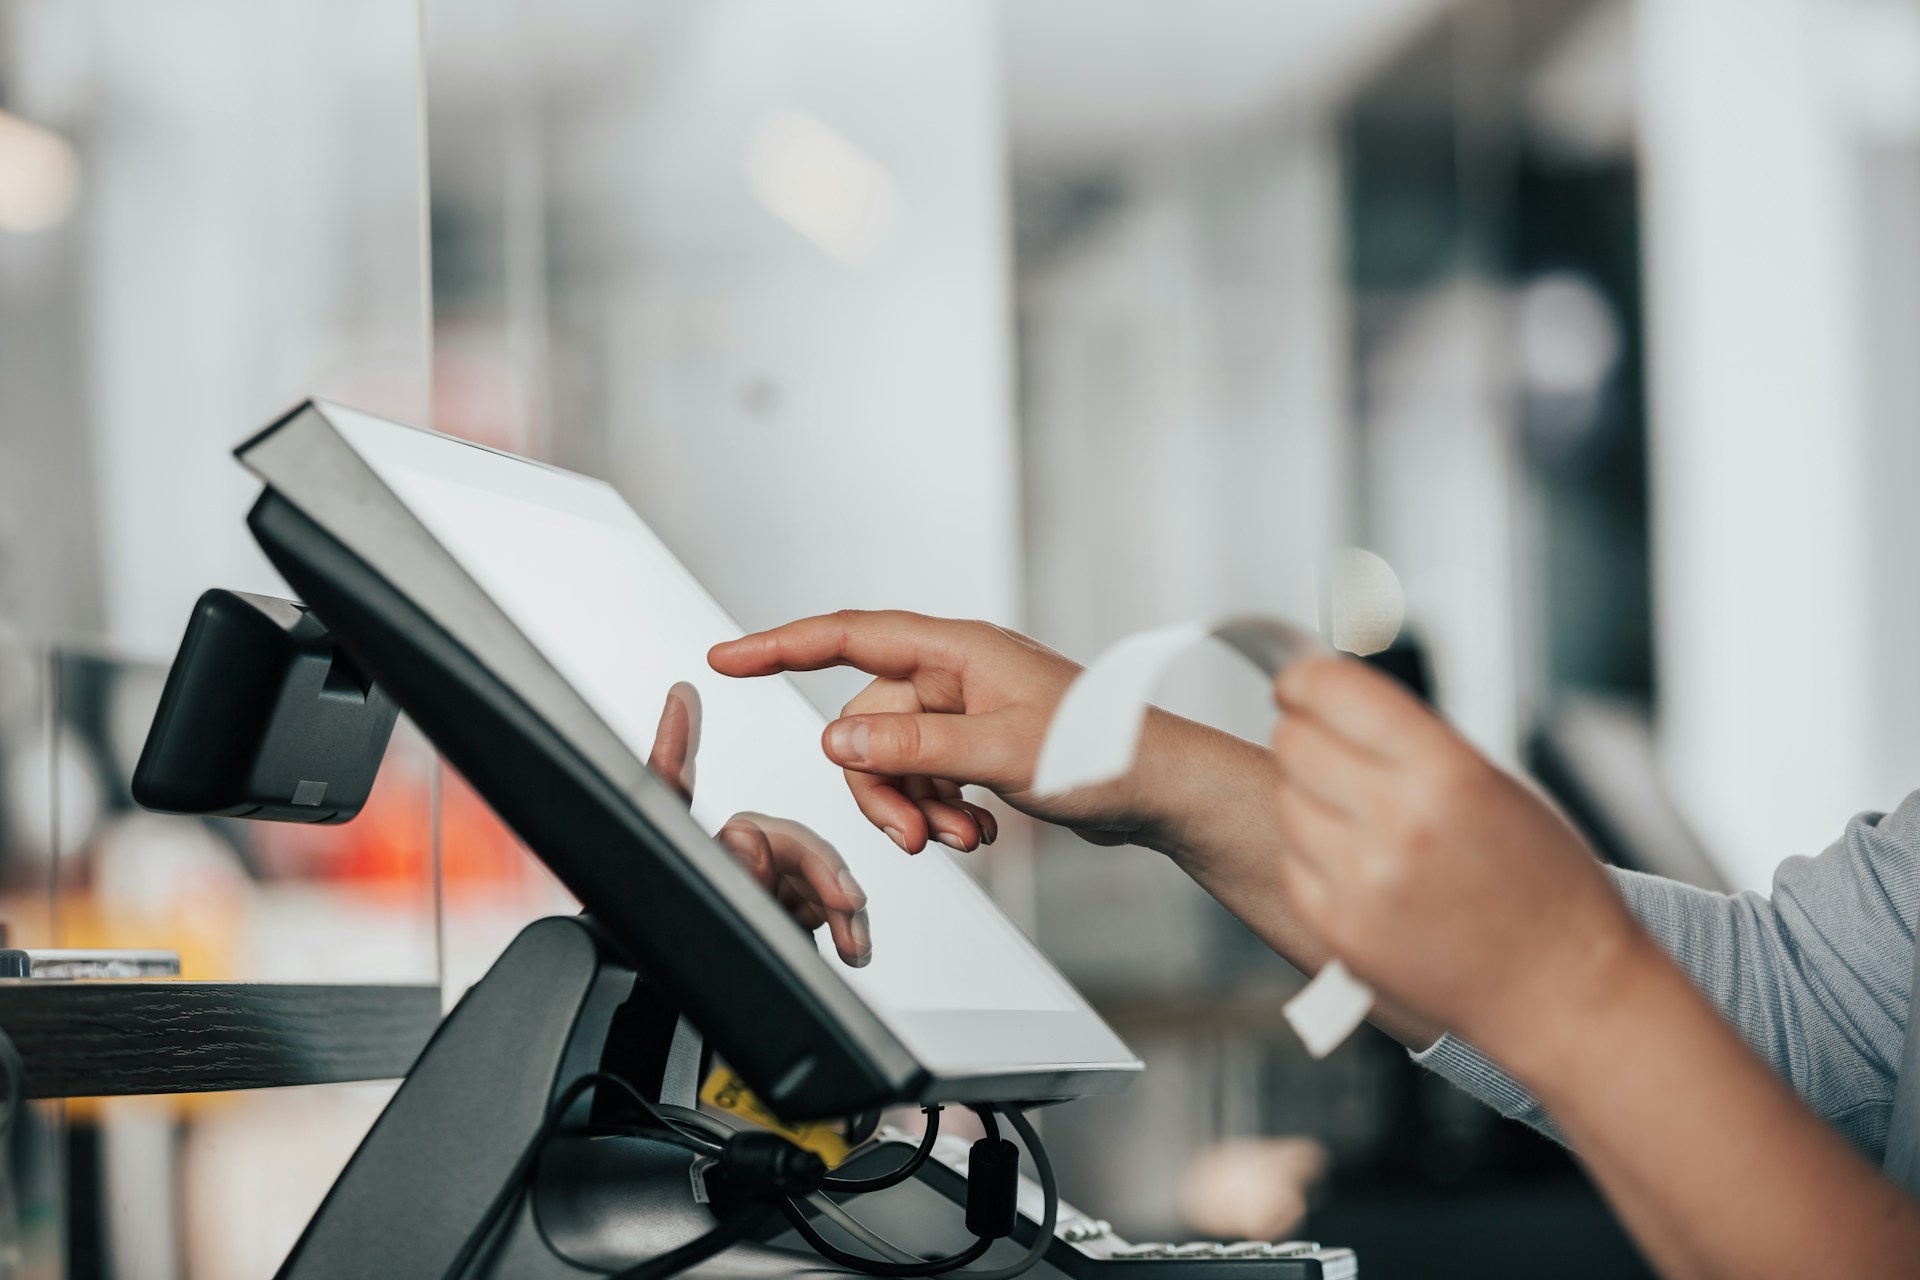 description: A close-up shot of a salesperson working a touchscreen cash register.  One hand is tapping the screen while the other is holding a receipt.  Photo by Simon Kadula on Unsplash.